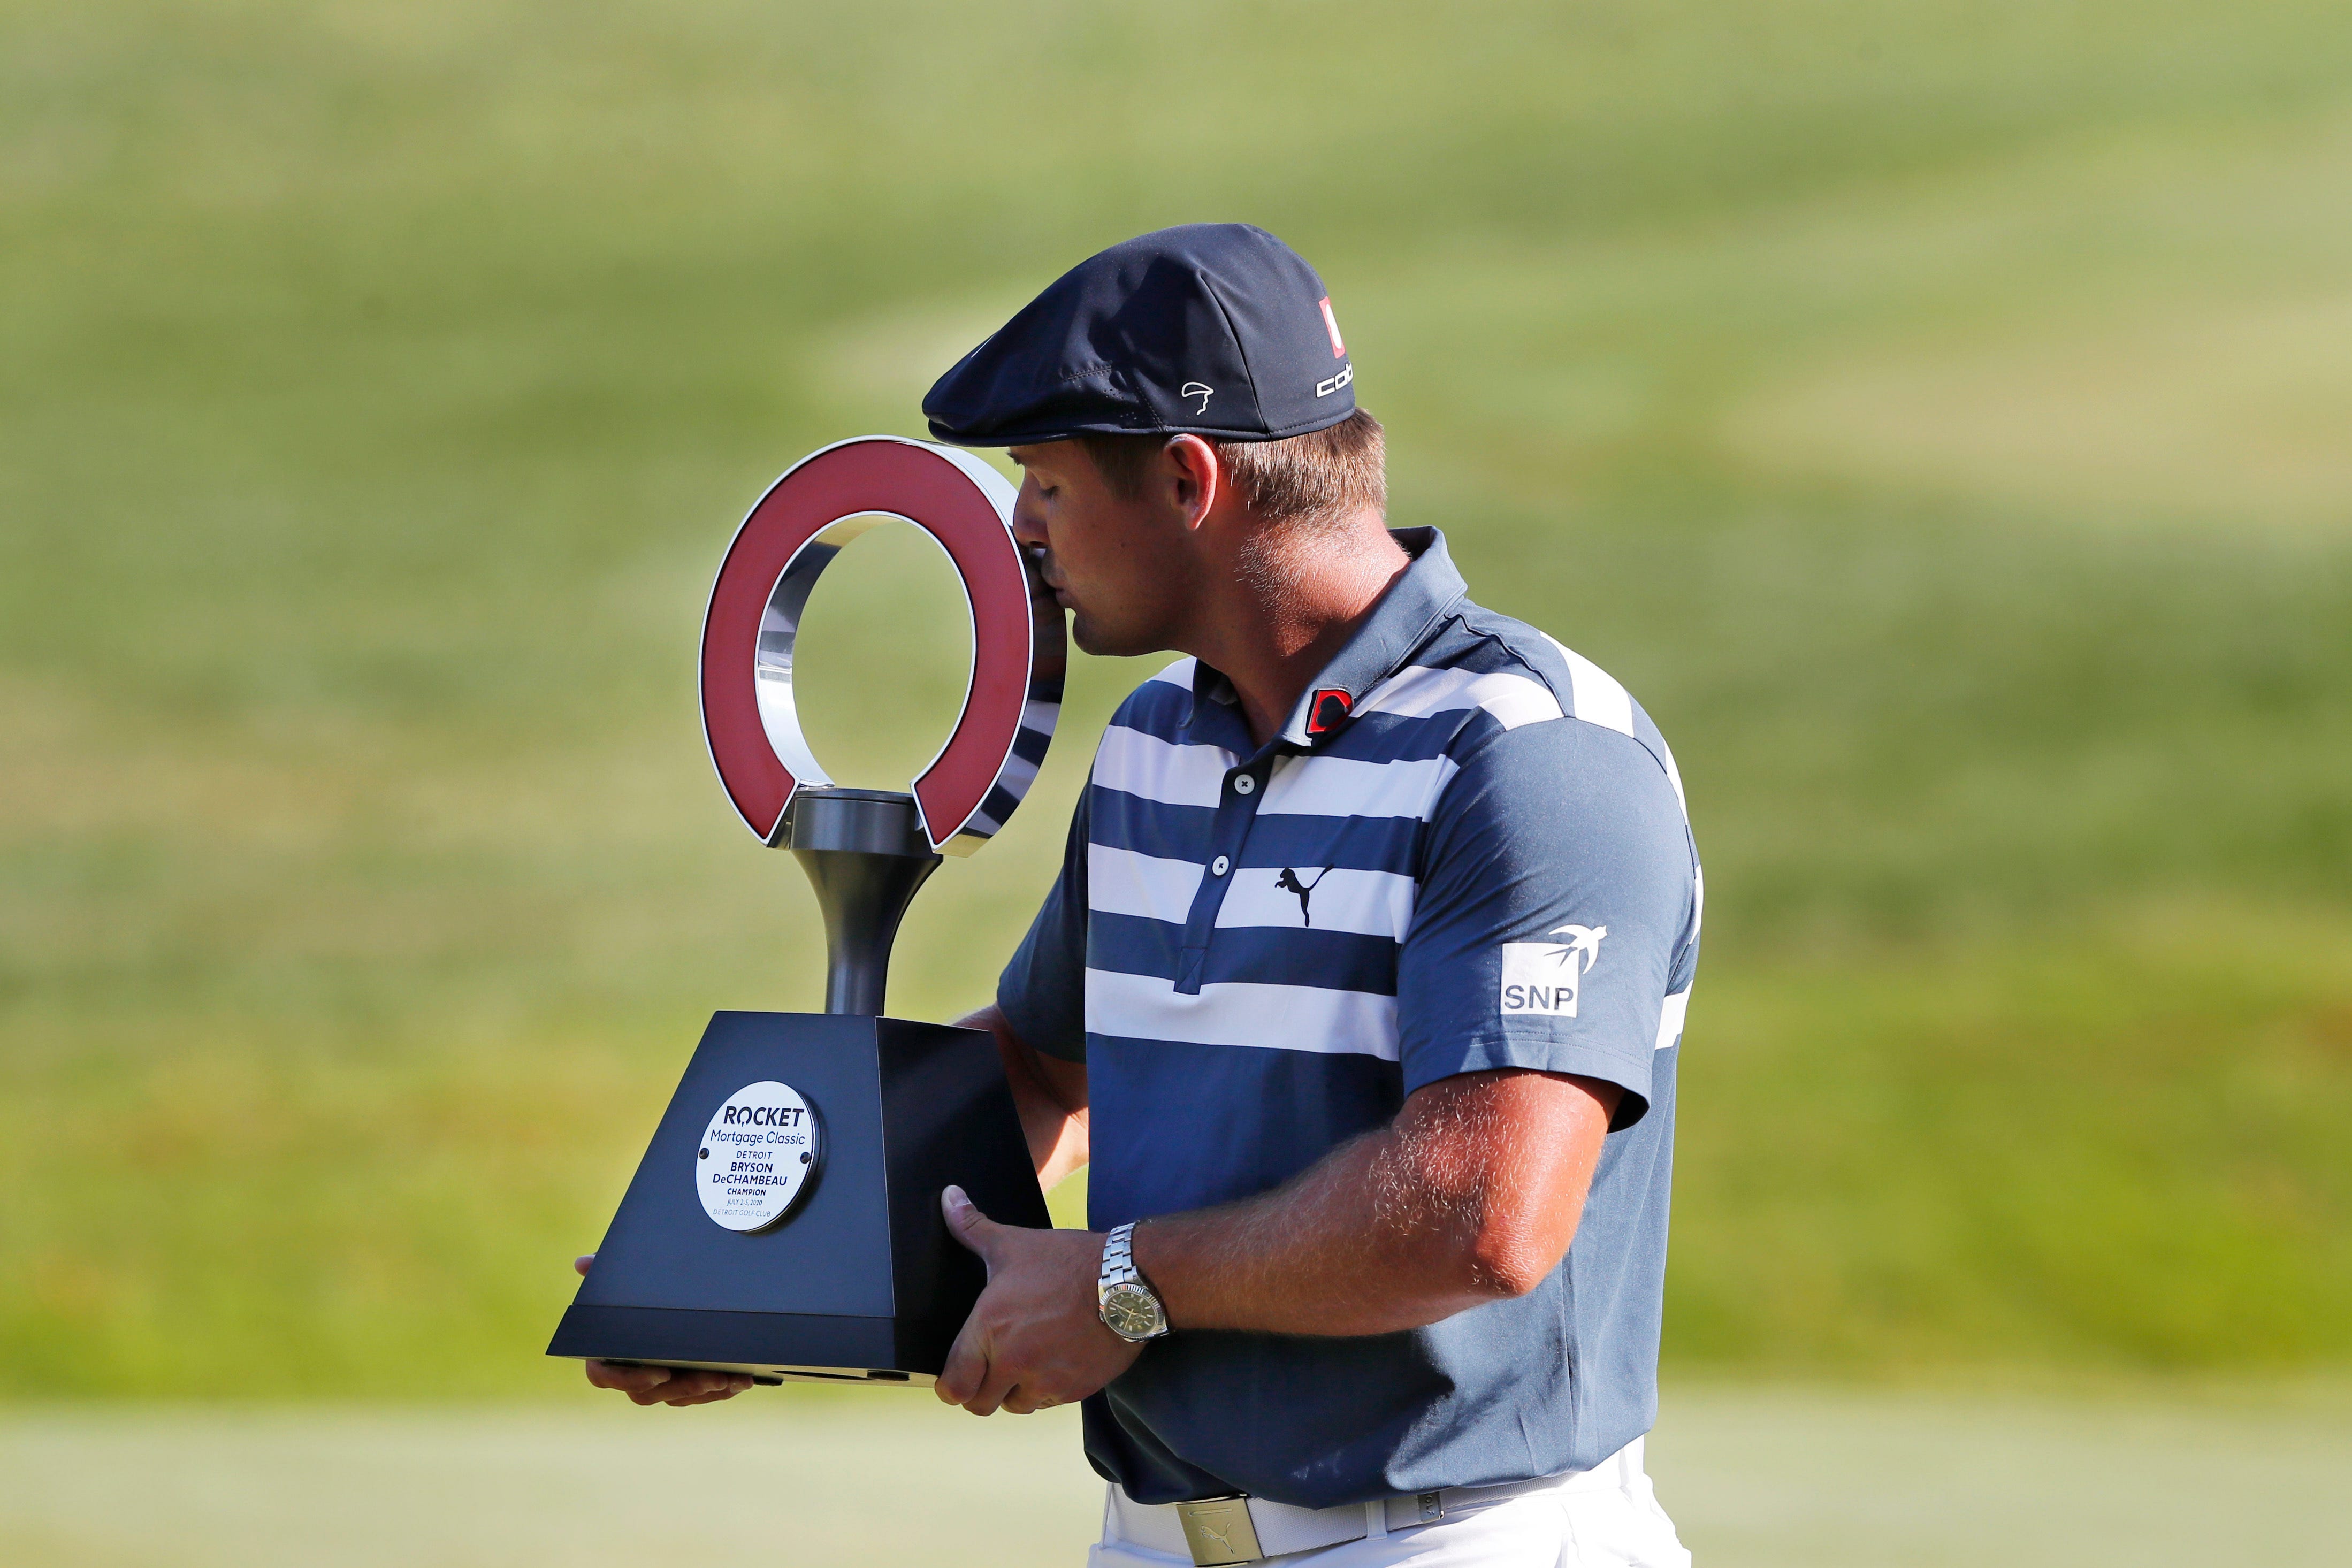 Bryson DeChambeau kisses the Rocket Mortgage Classic golf tournament trophy after winning in 2020.